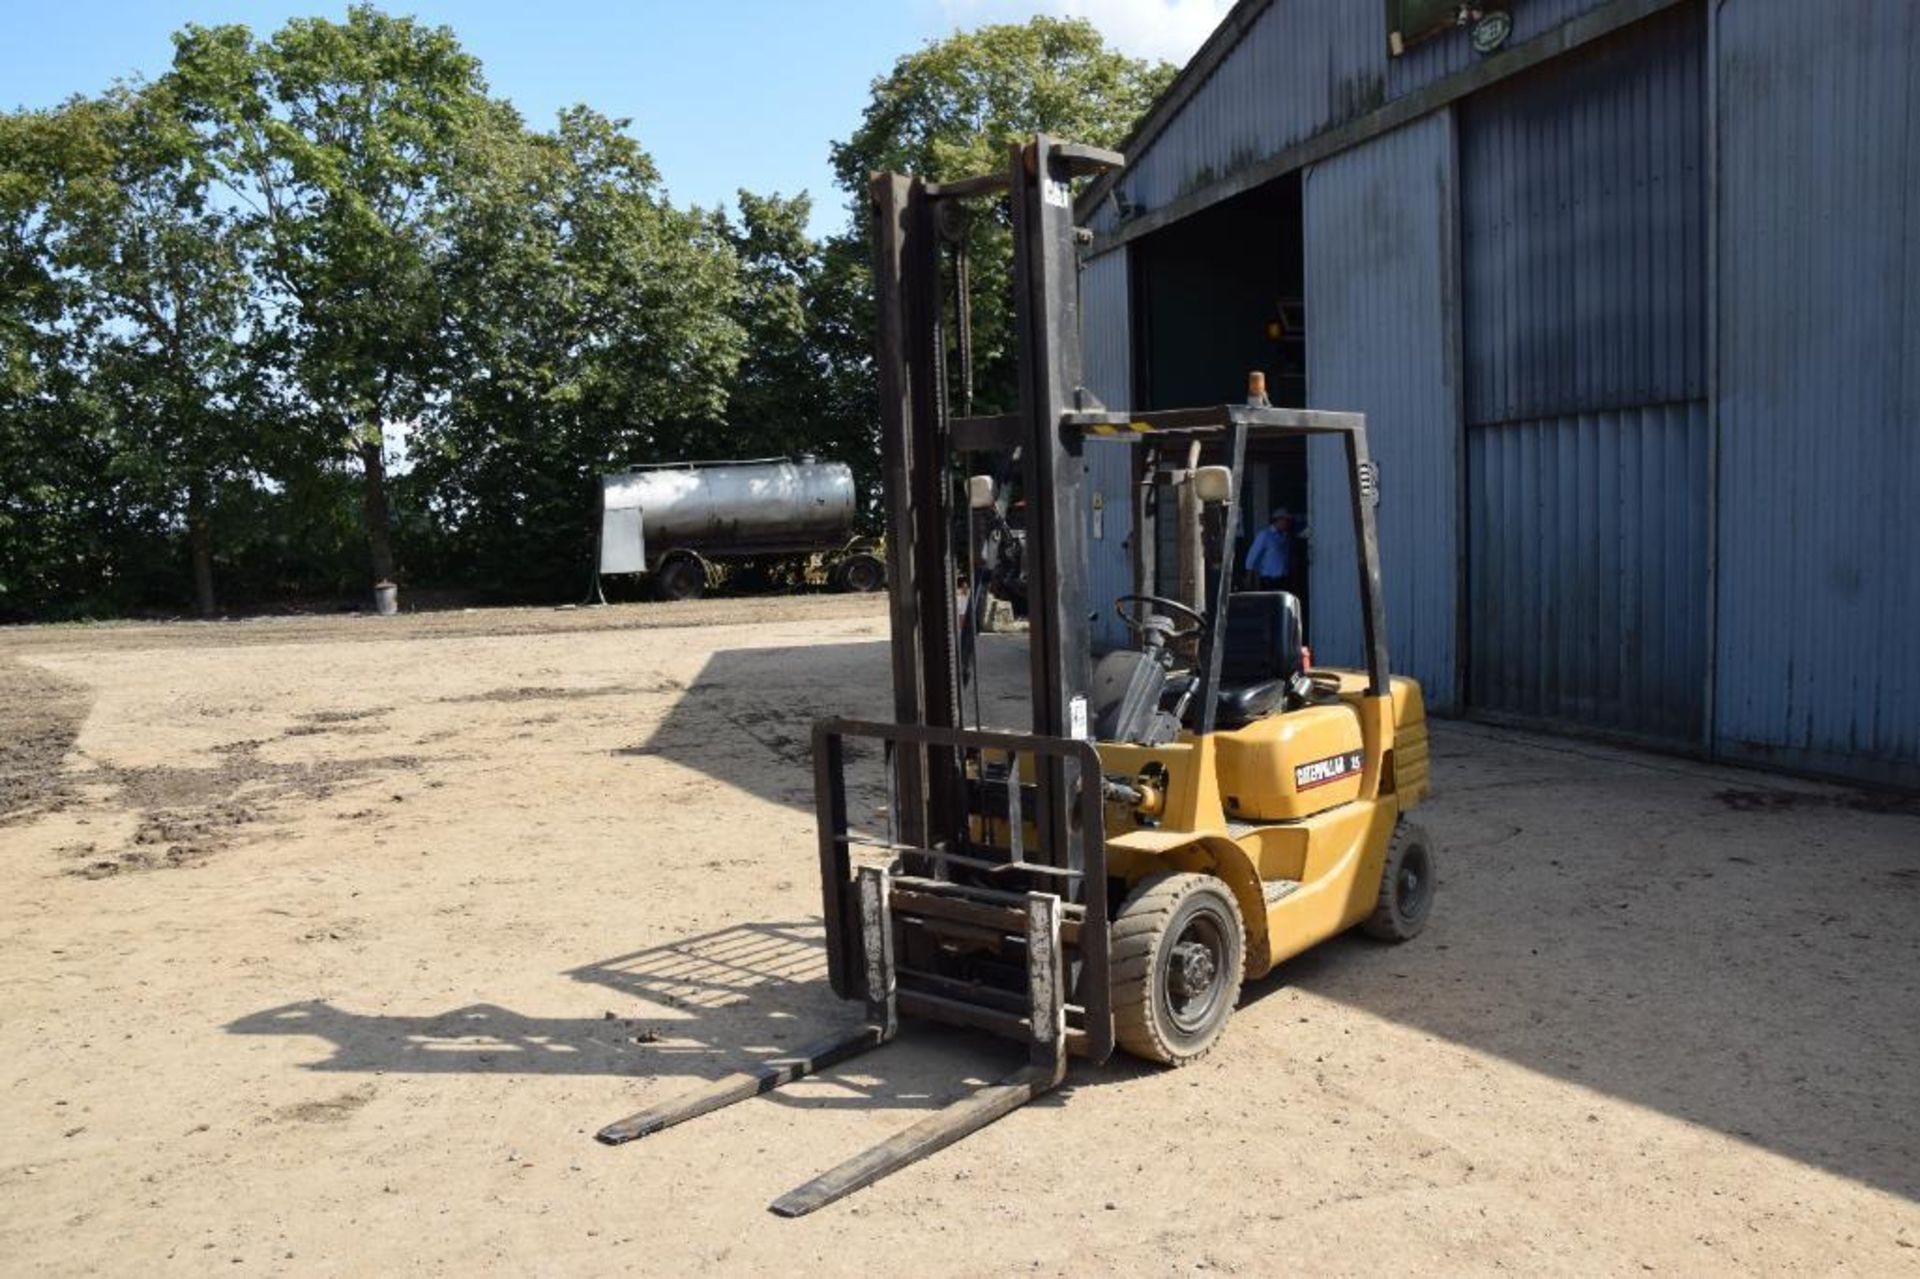 1996 Caterpillar DP25 2.5t industrial forklift. Hours: 6517. Serial No: 6BN00199. Manual in office. - Image 10 of 12